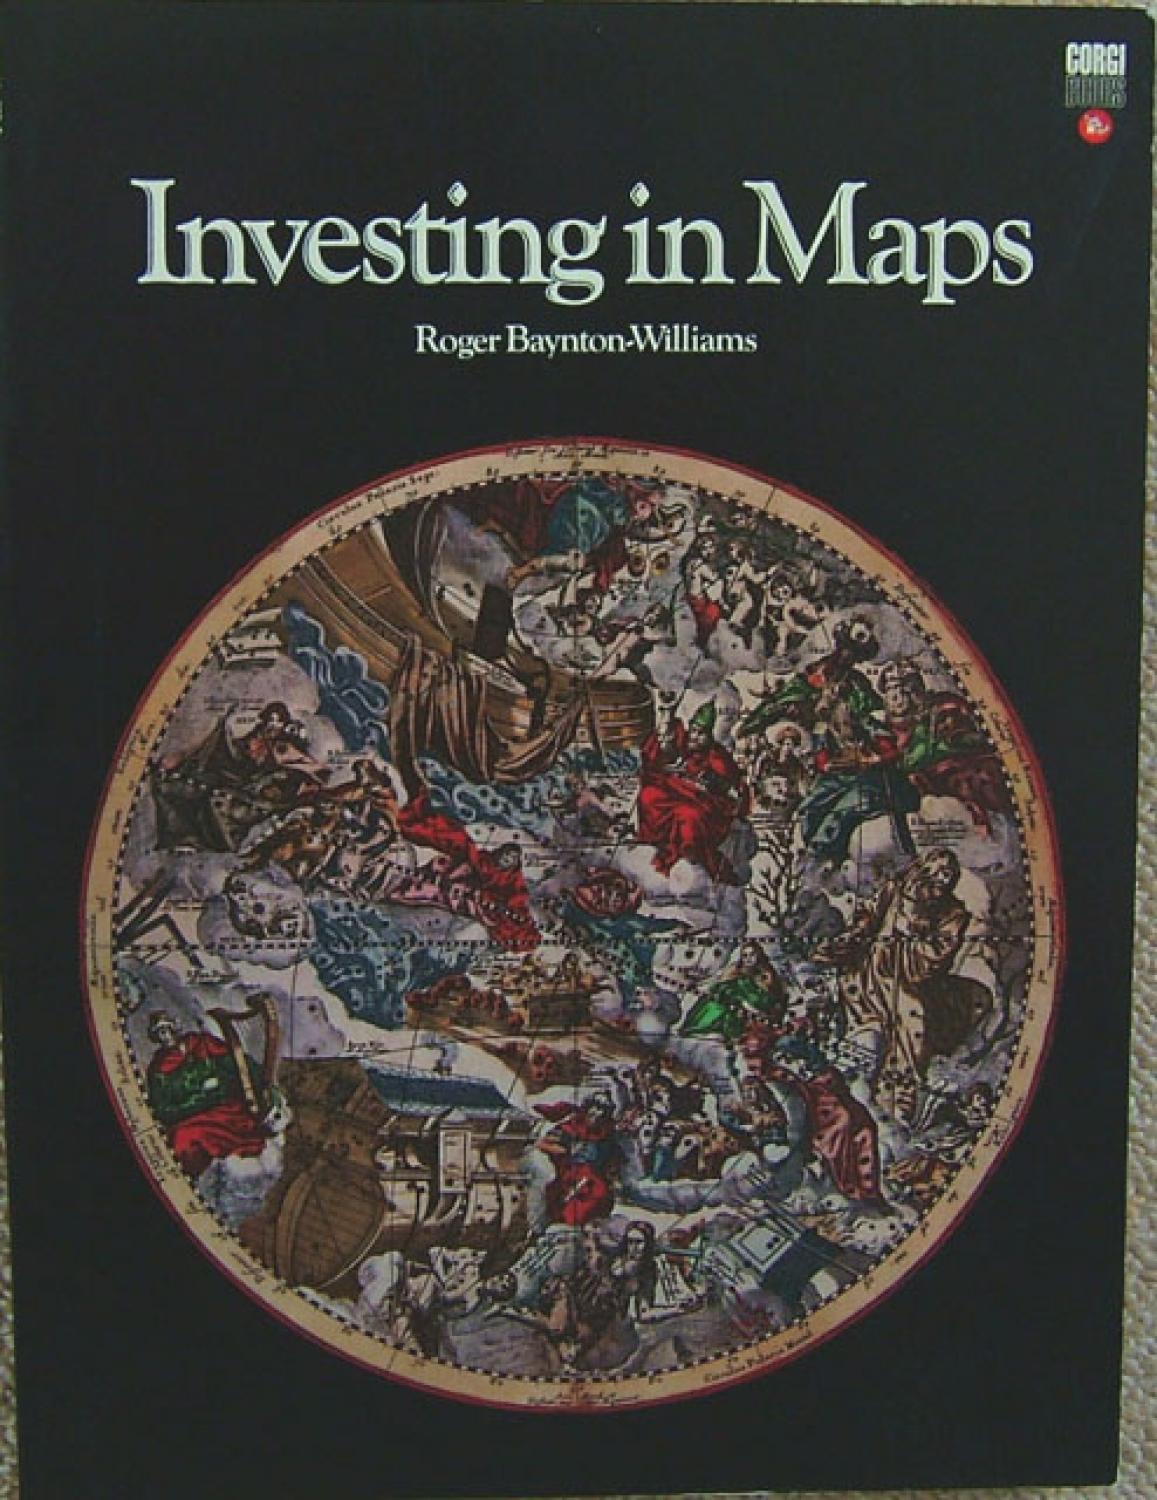 SOLD Investing in Maps